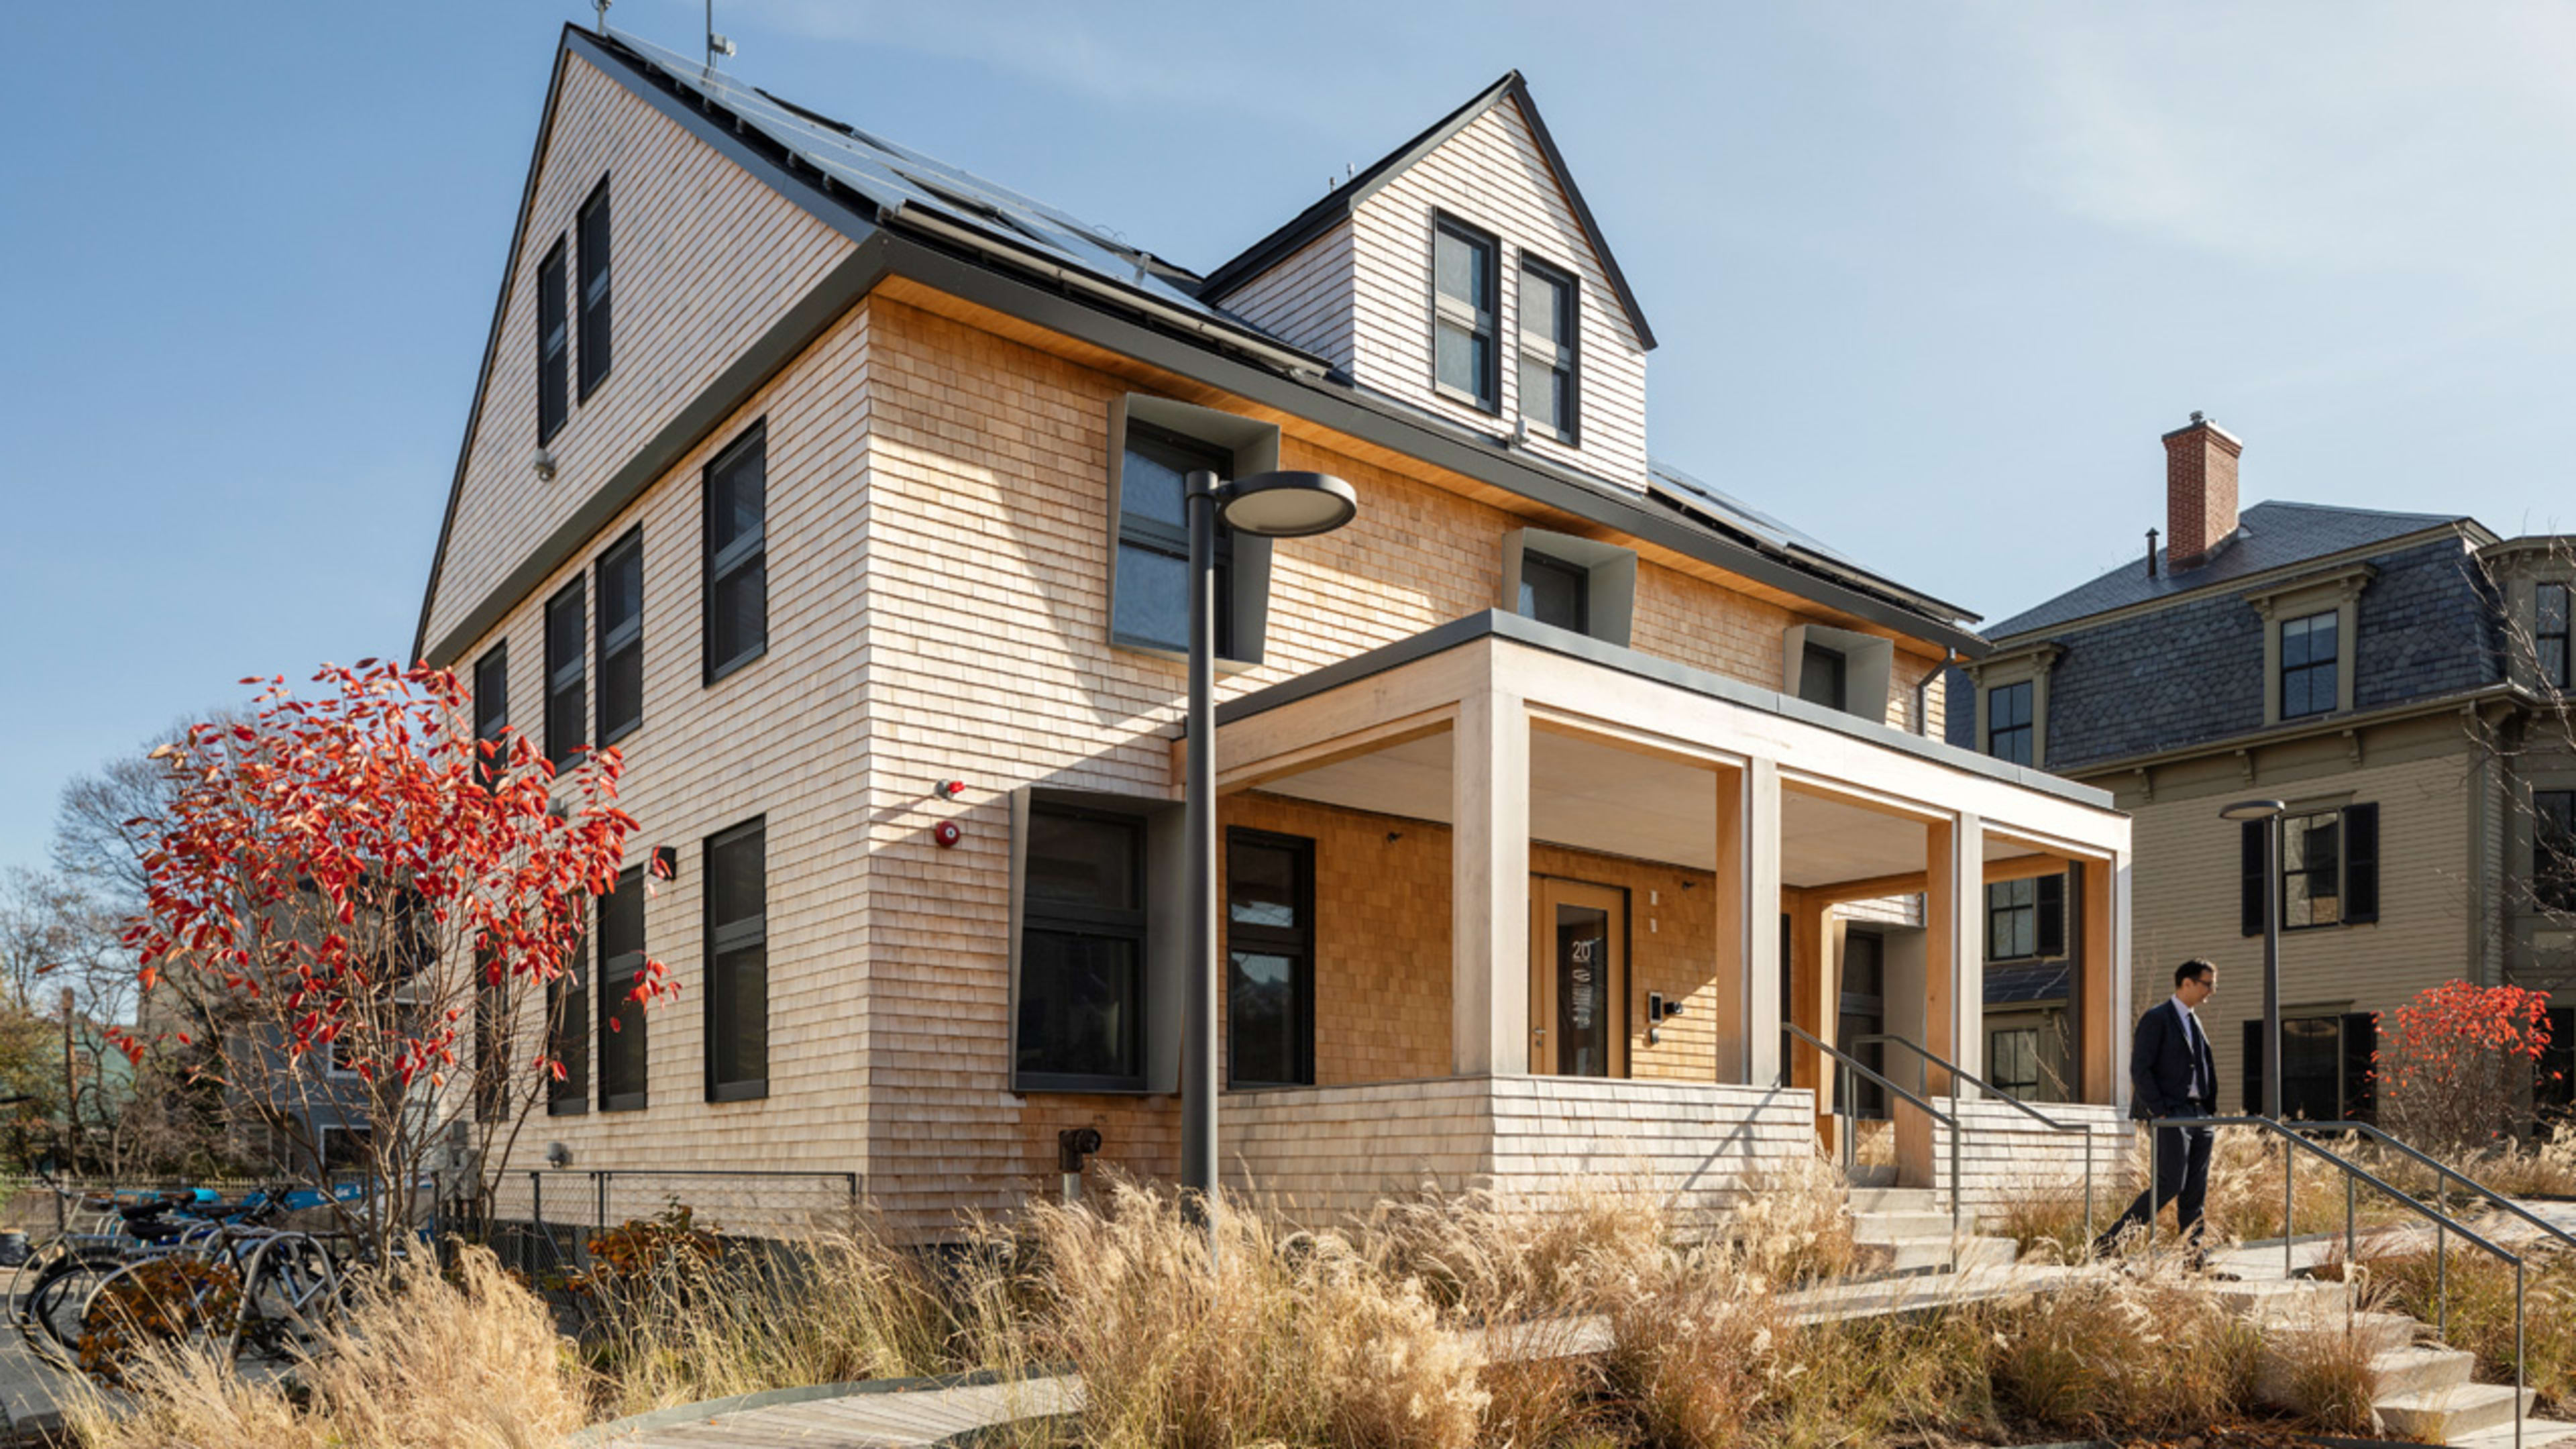 Check out this transformation from old house to ultra-efficient sustainable building